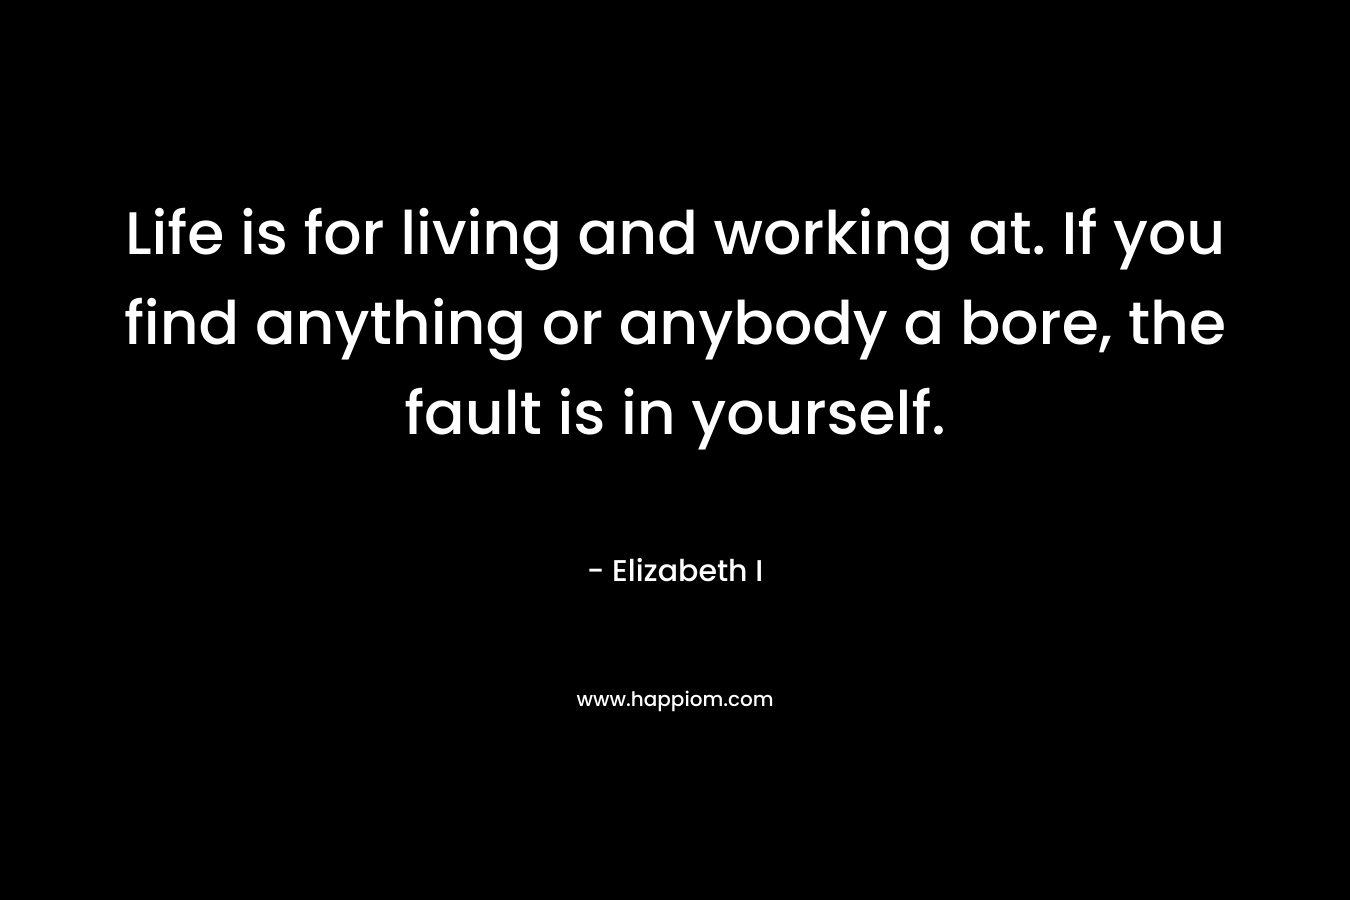 Life is for living and working at. If you find anything or anybody a bore, the fault is in yourself. – Elizabeth I